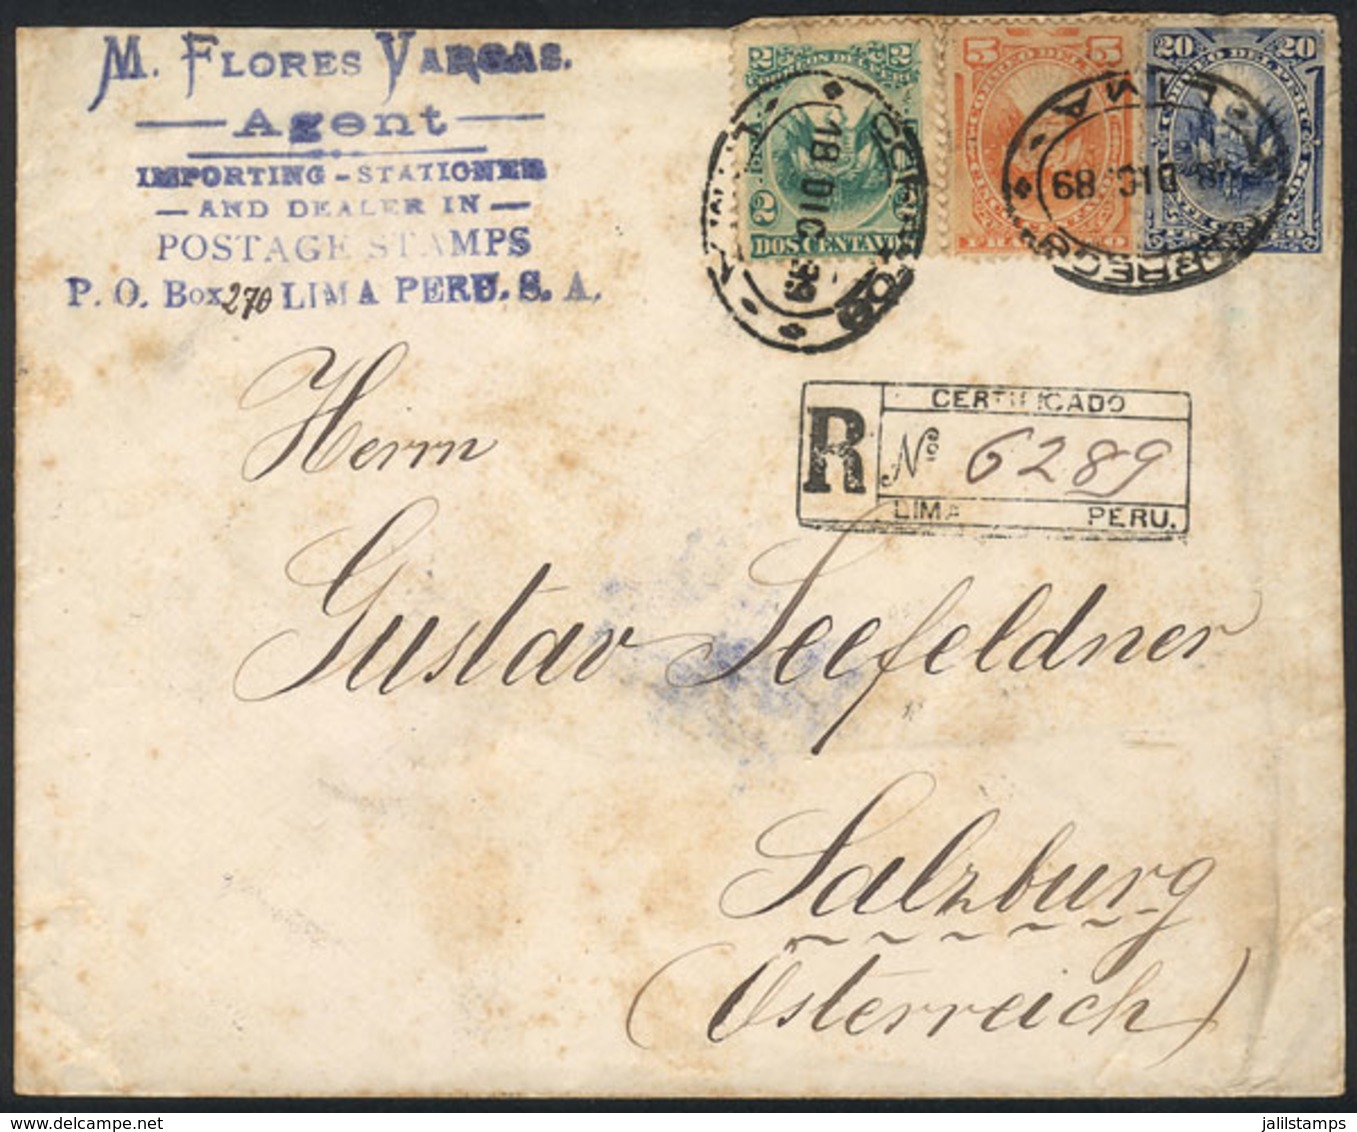 PERU: Registered Cover Sent From Lima To Austria On 18/DE/1889 Franked With 27c., It Was Sent By M. Flores Vargas Who Wa - Peru